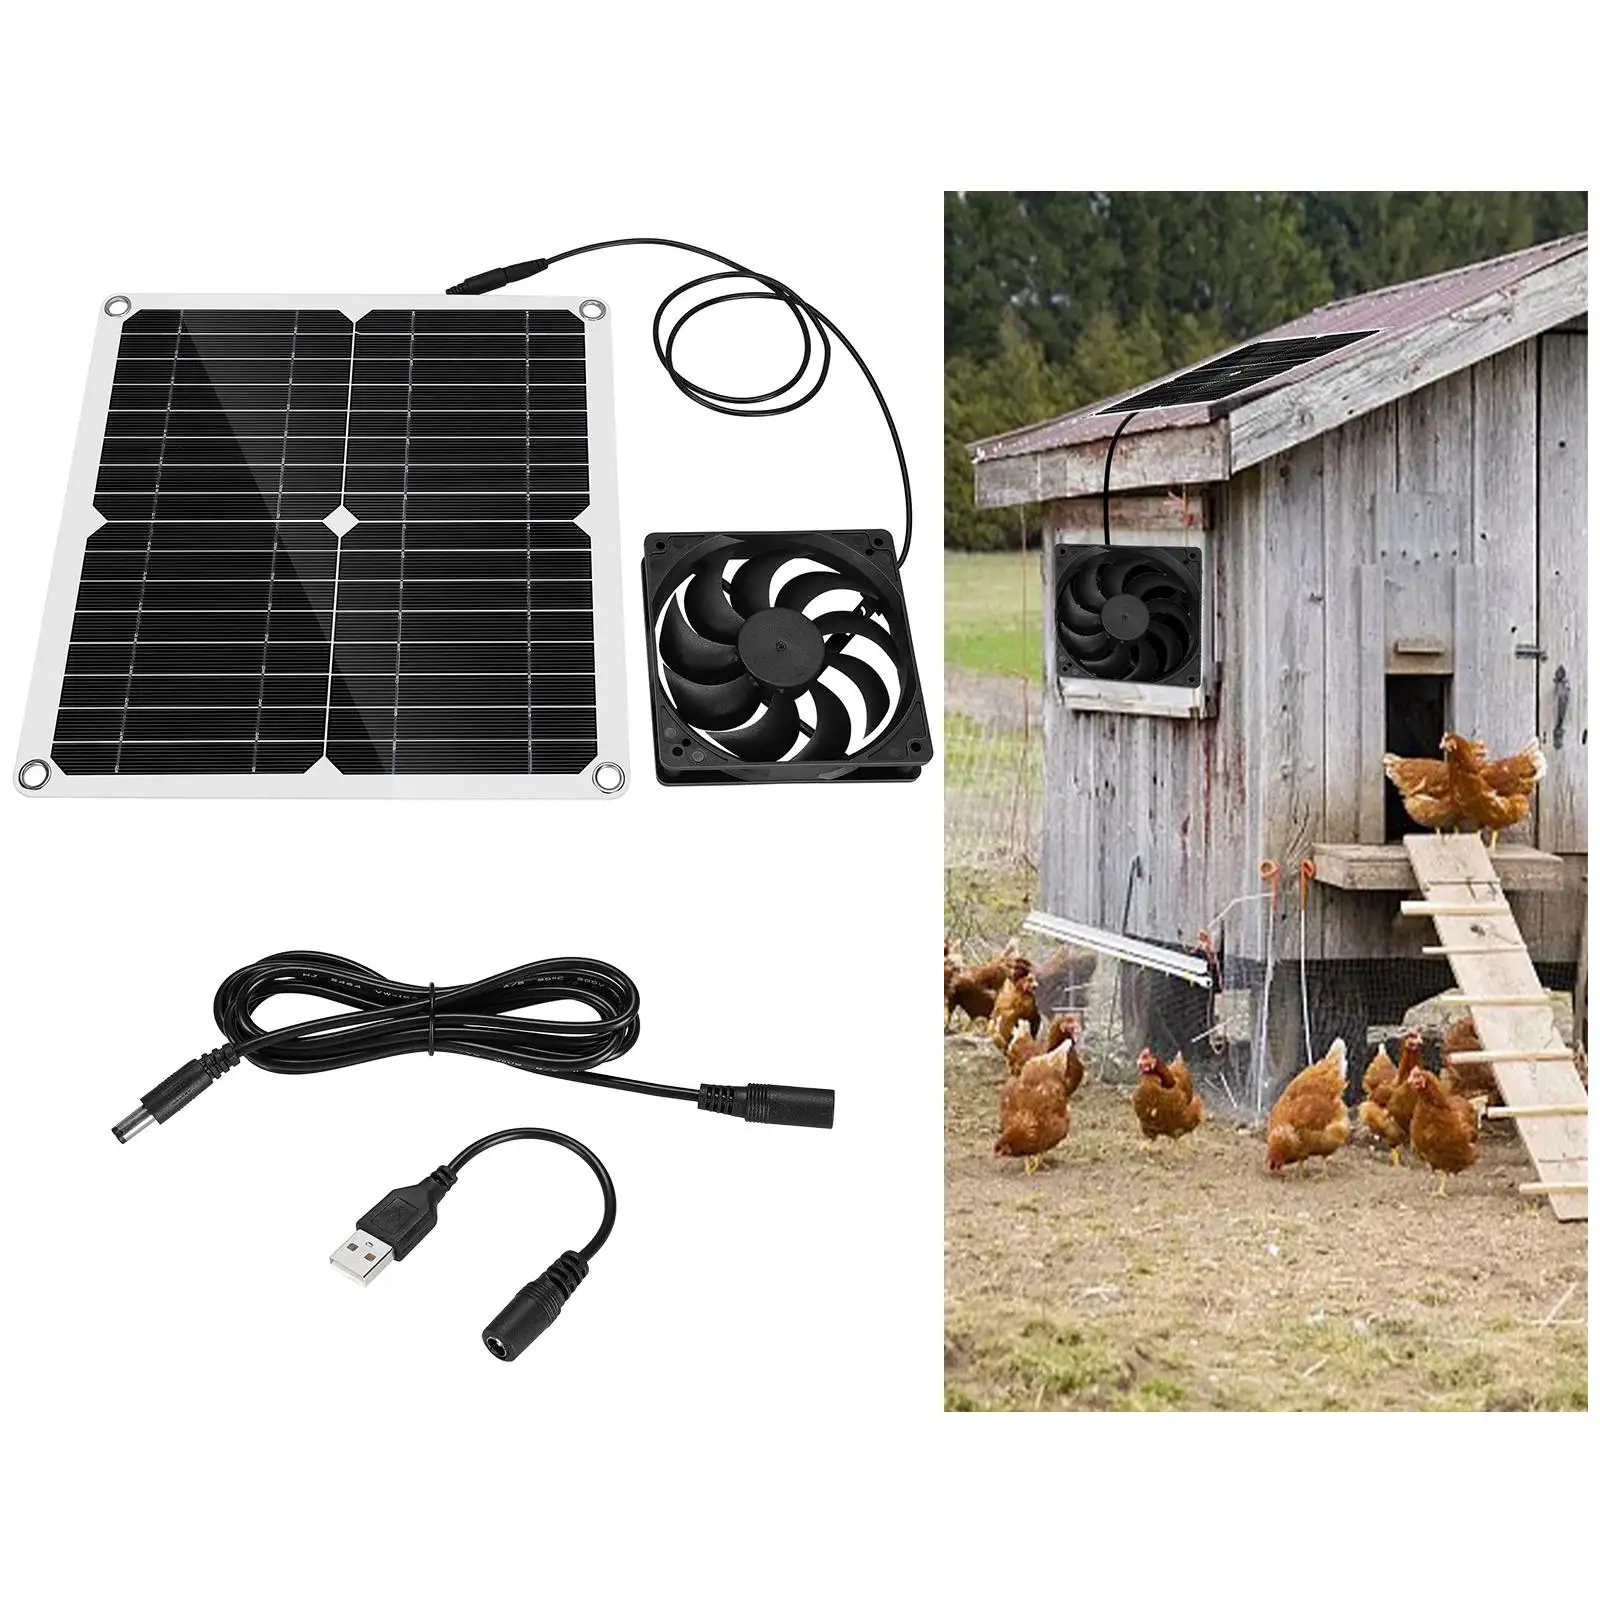 12W Solar Exhaust Fan Outdoor Air Extractor Portable 12V Mini Ventilator for Greenhouse Rvs Office Chicken House Phone Charger